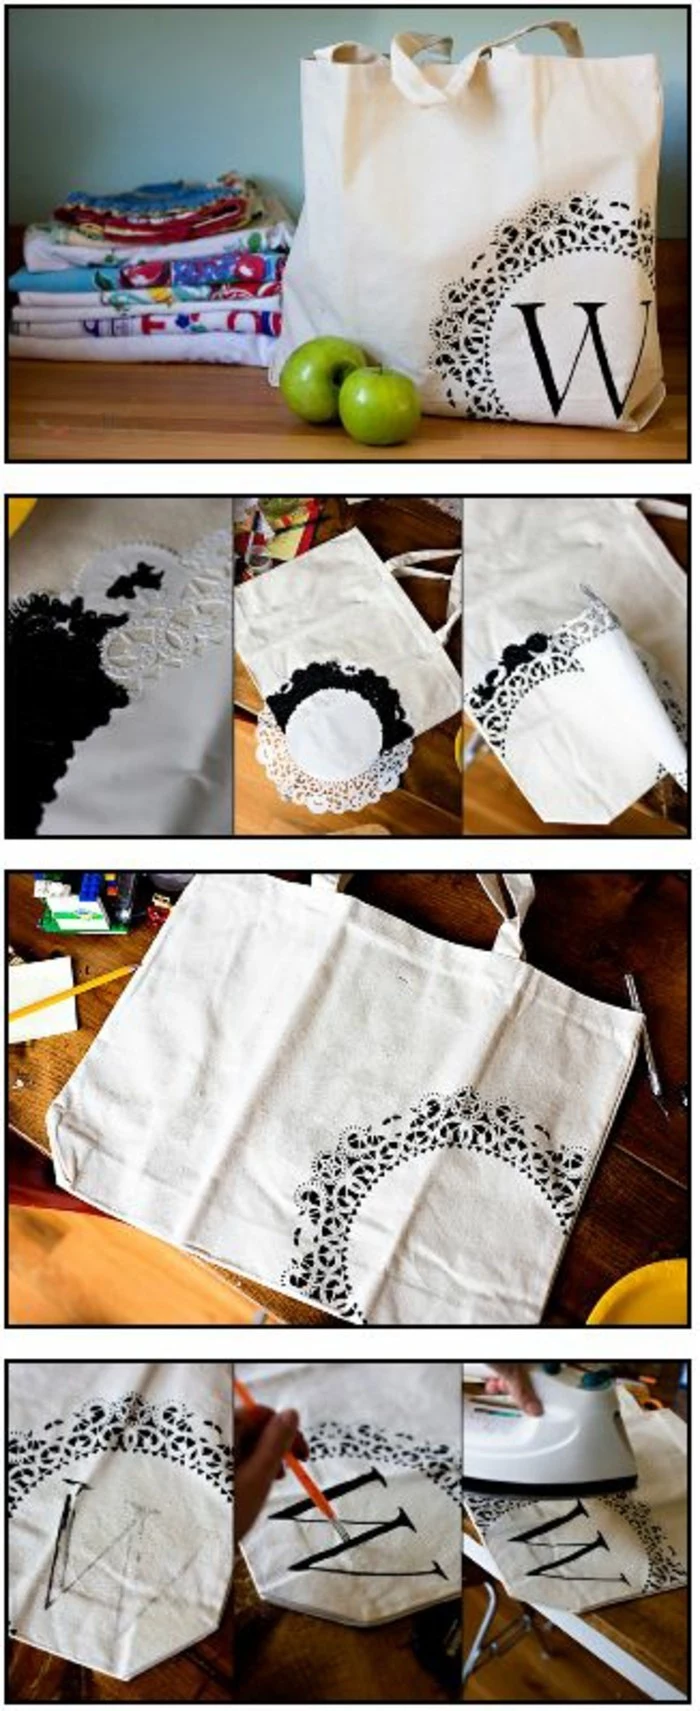 white shopping bag, letter w, black decoration, painted on it, creative homemade gifts, diy tutorial